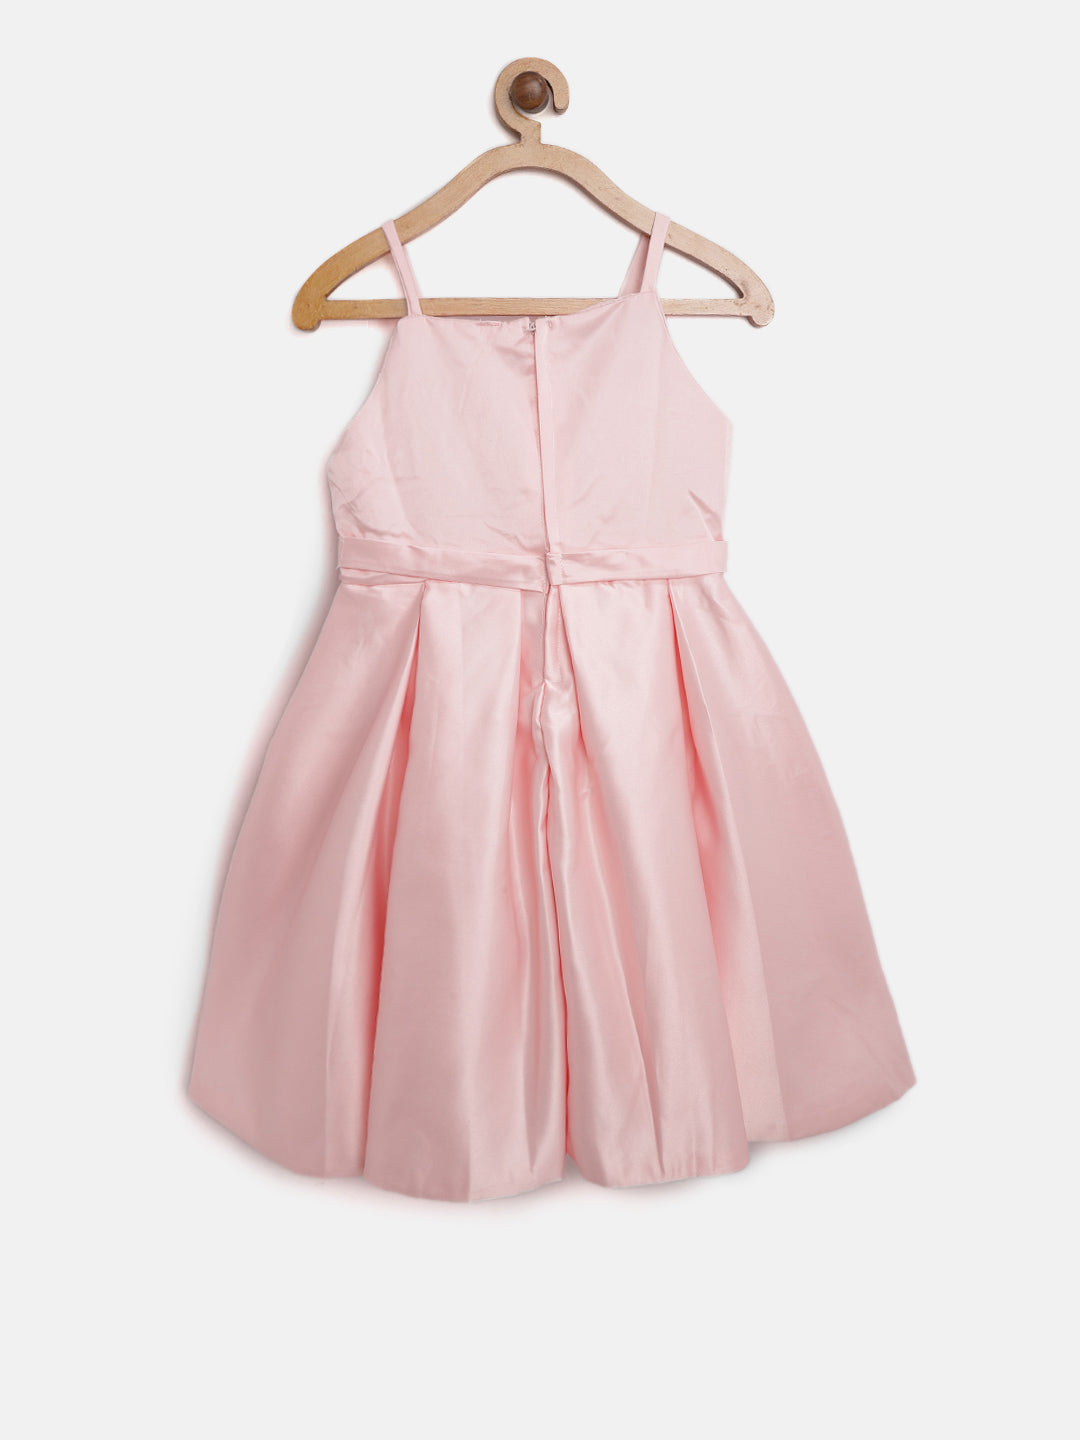 Girls Pink Pleated and embellished Party Dress with beautiful back Bow